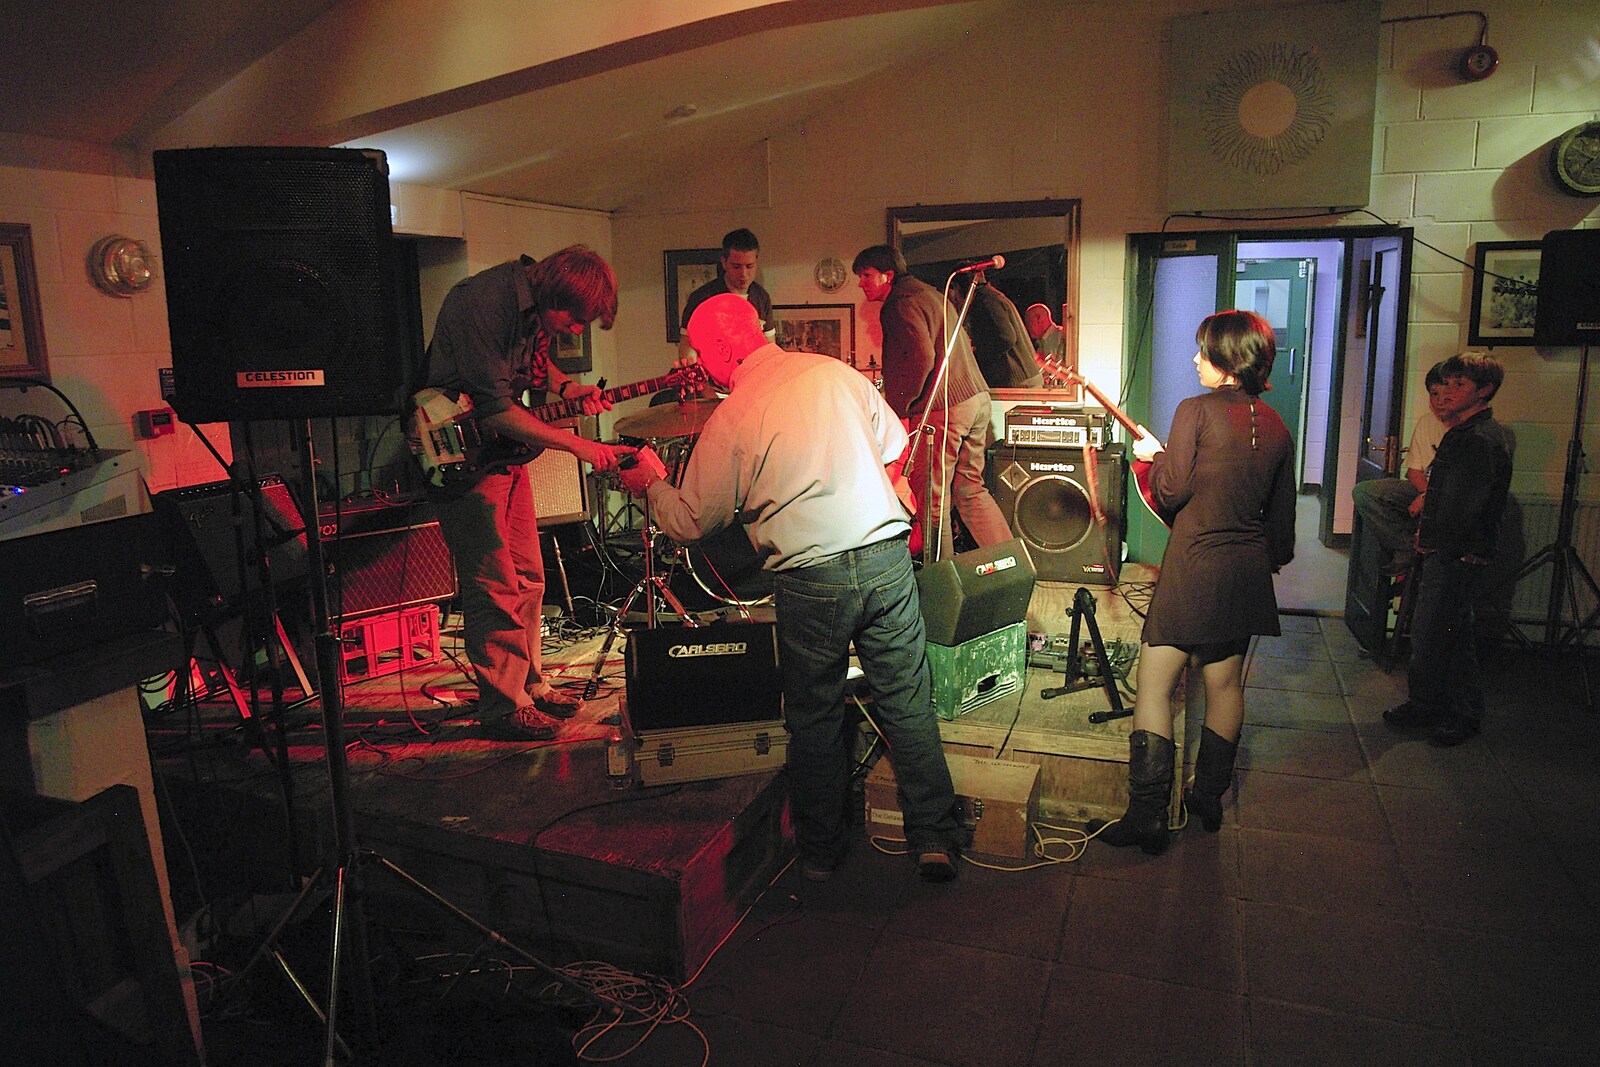 Rob helps switch bands over from The Destruction of Padley's, and Alex Hill at the Barrel, Diss and Banham - 12th November 2005